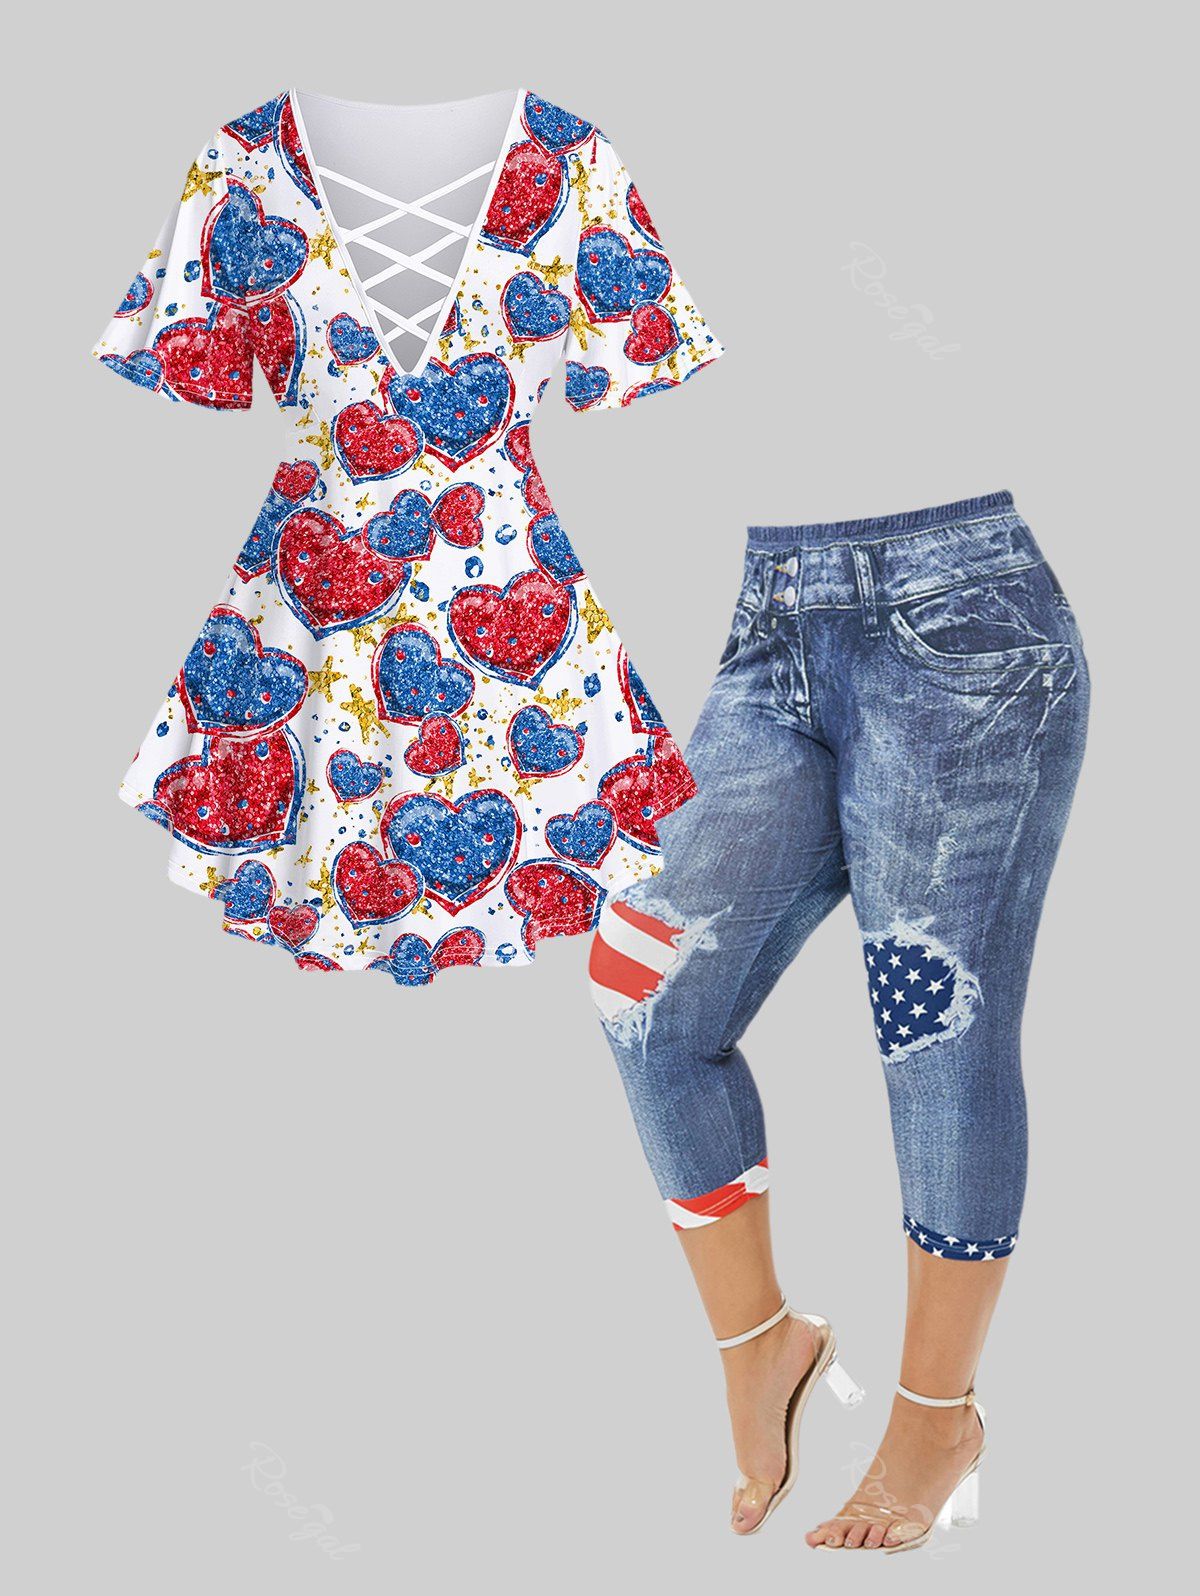 Shops Plus Size Heart Printed Crisscross Short Sleeves Tee and American Flag 3D Printed Skinny Capri Plus Size Jeggings Outfit Bundle  